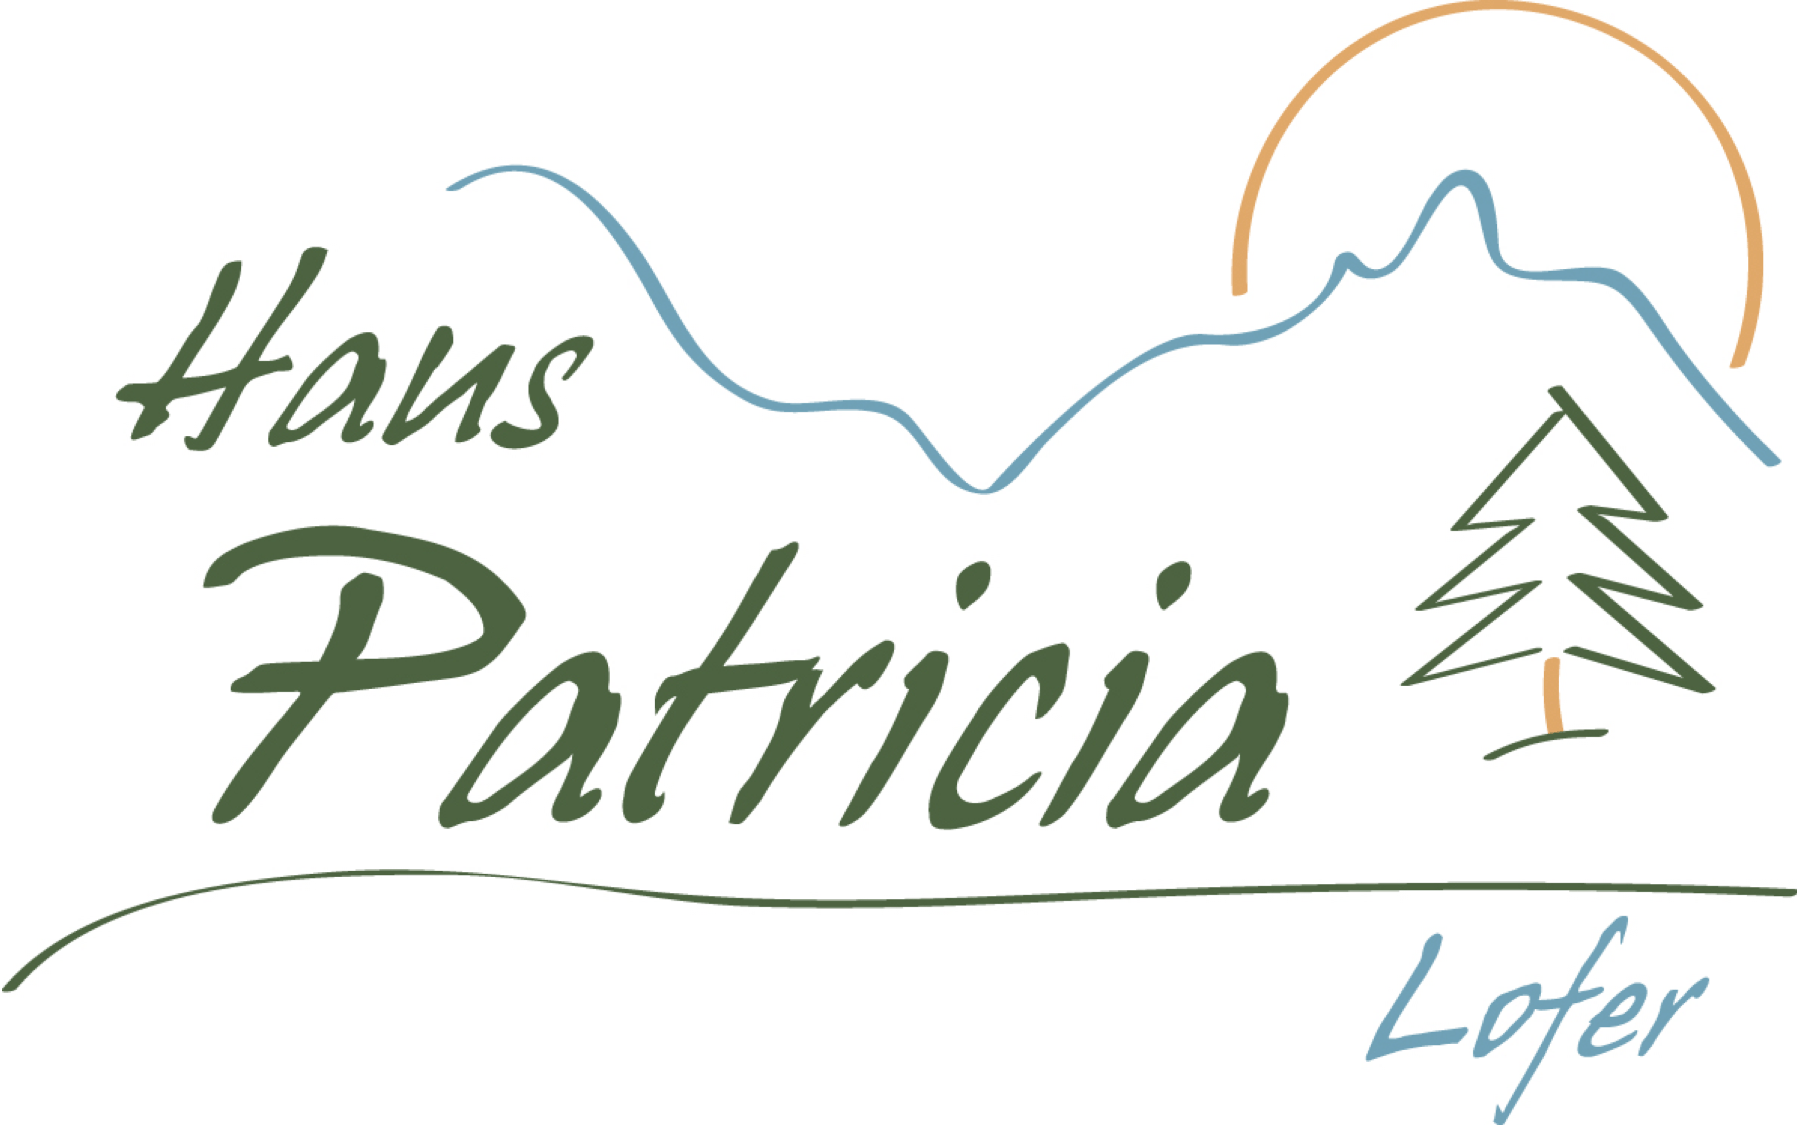 A logo for haus patricia lofer with a mountain in the background